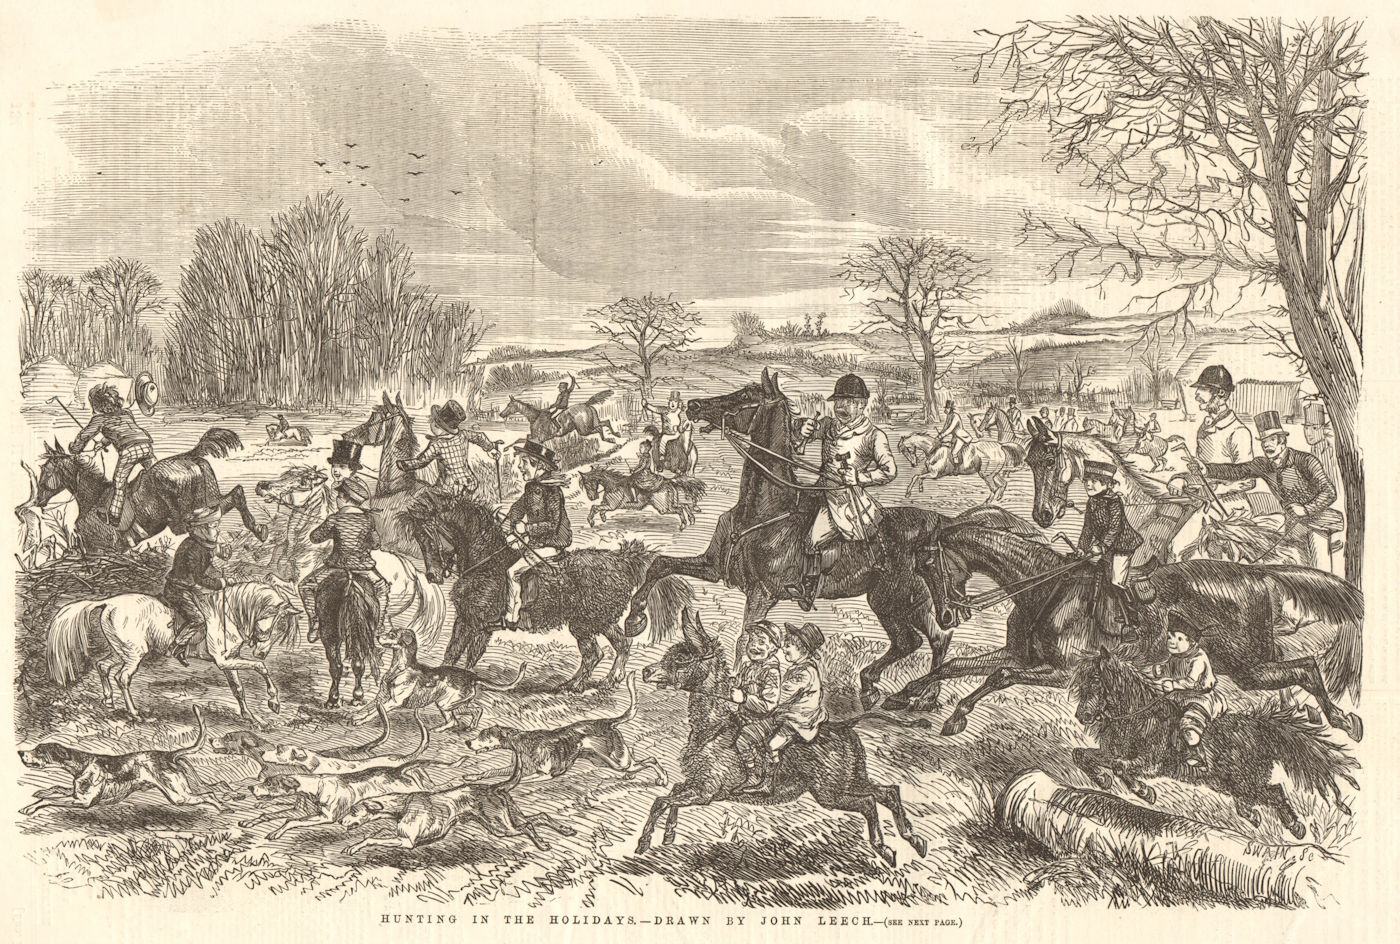 Hunting in the holidays - drawn by John Leech. England 1855 old antique print